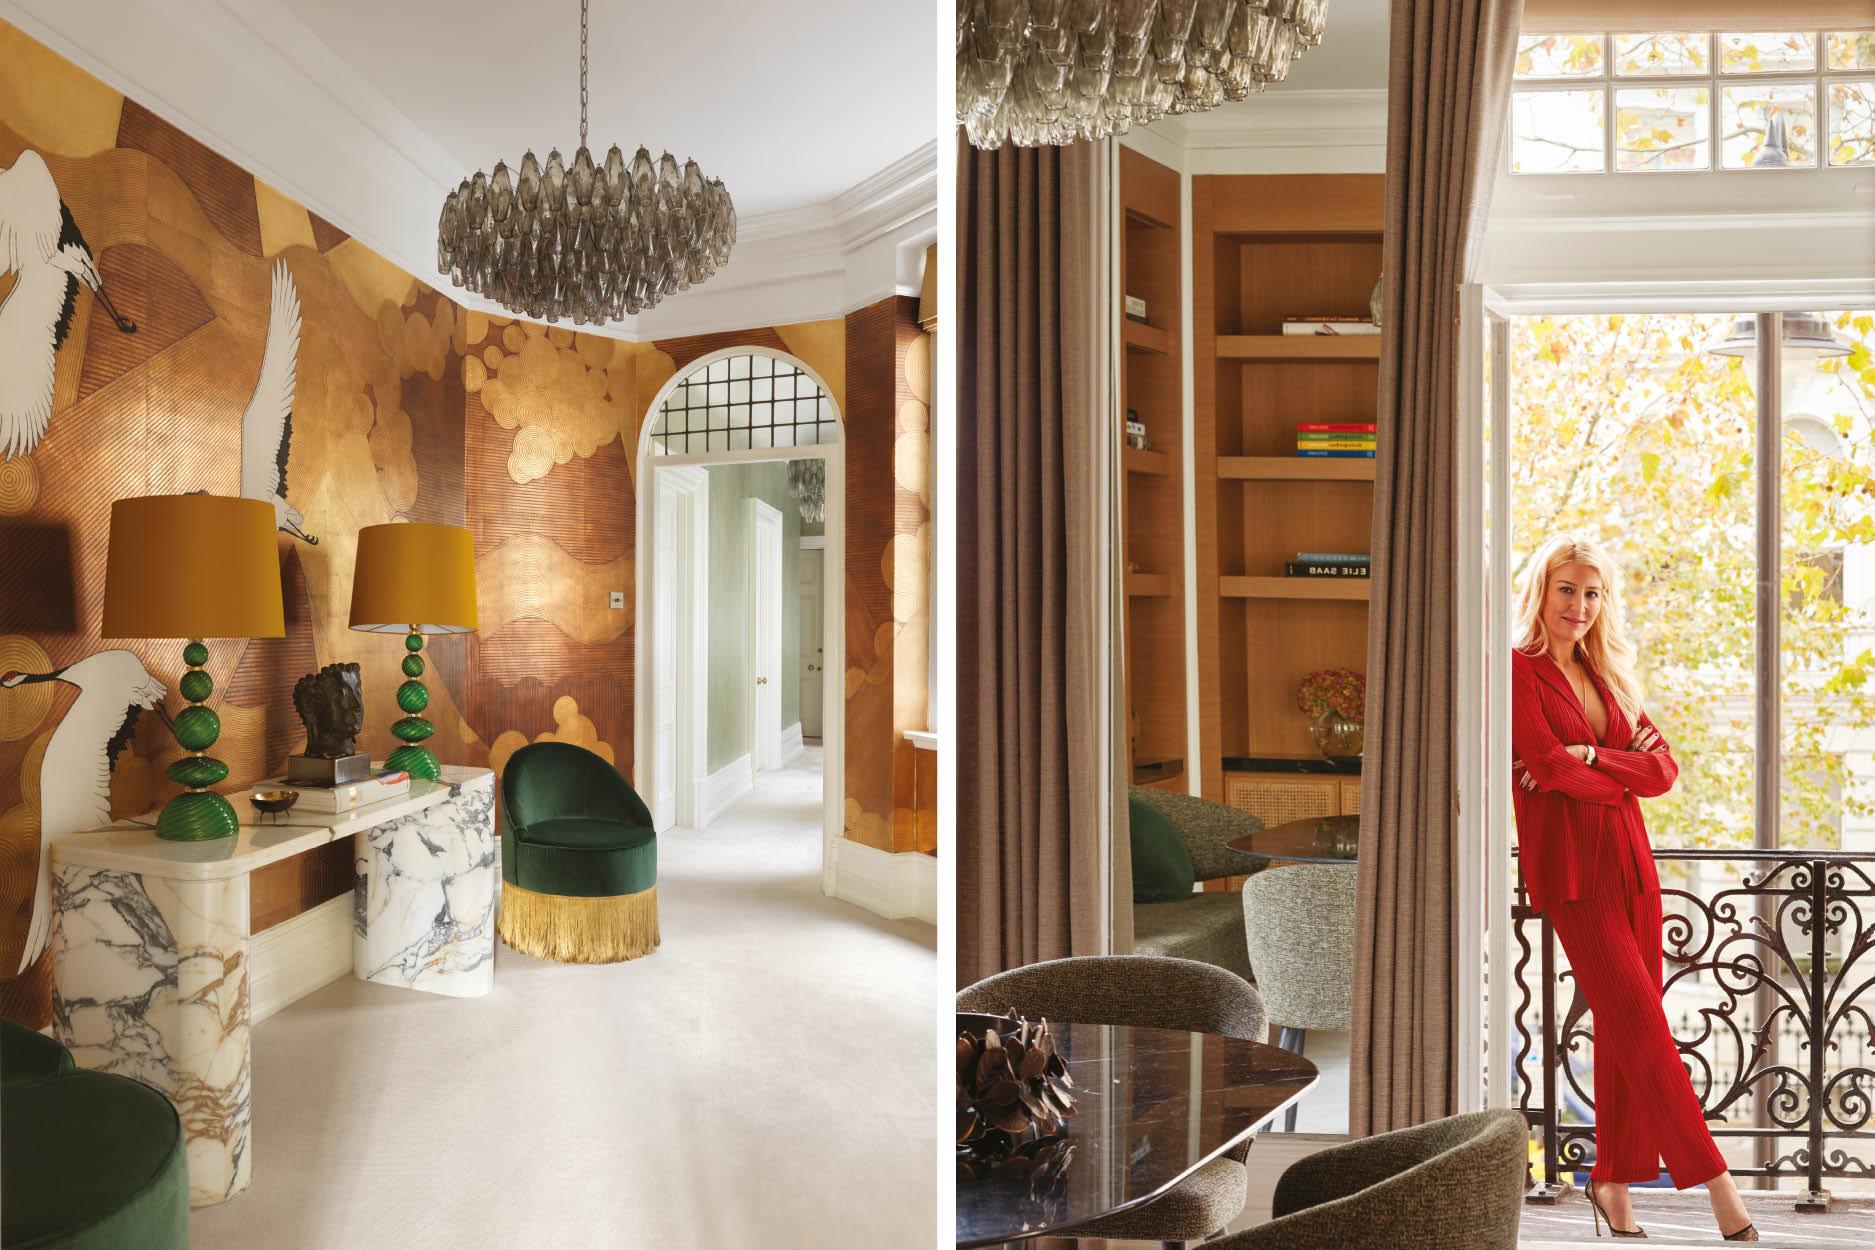 Experience Parisian Chic inside this Luxurious Pied-à-Terre